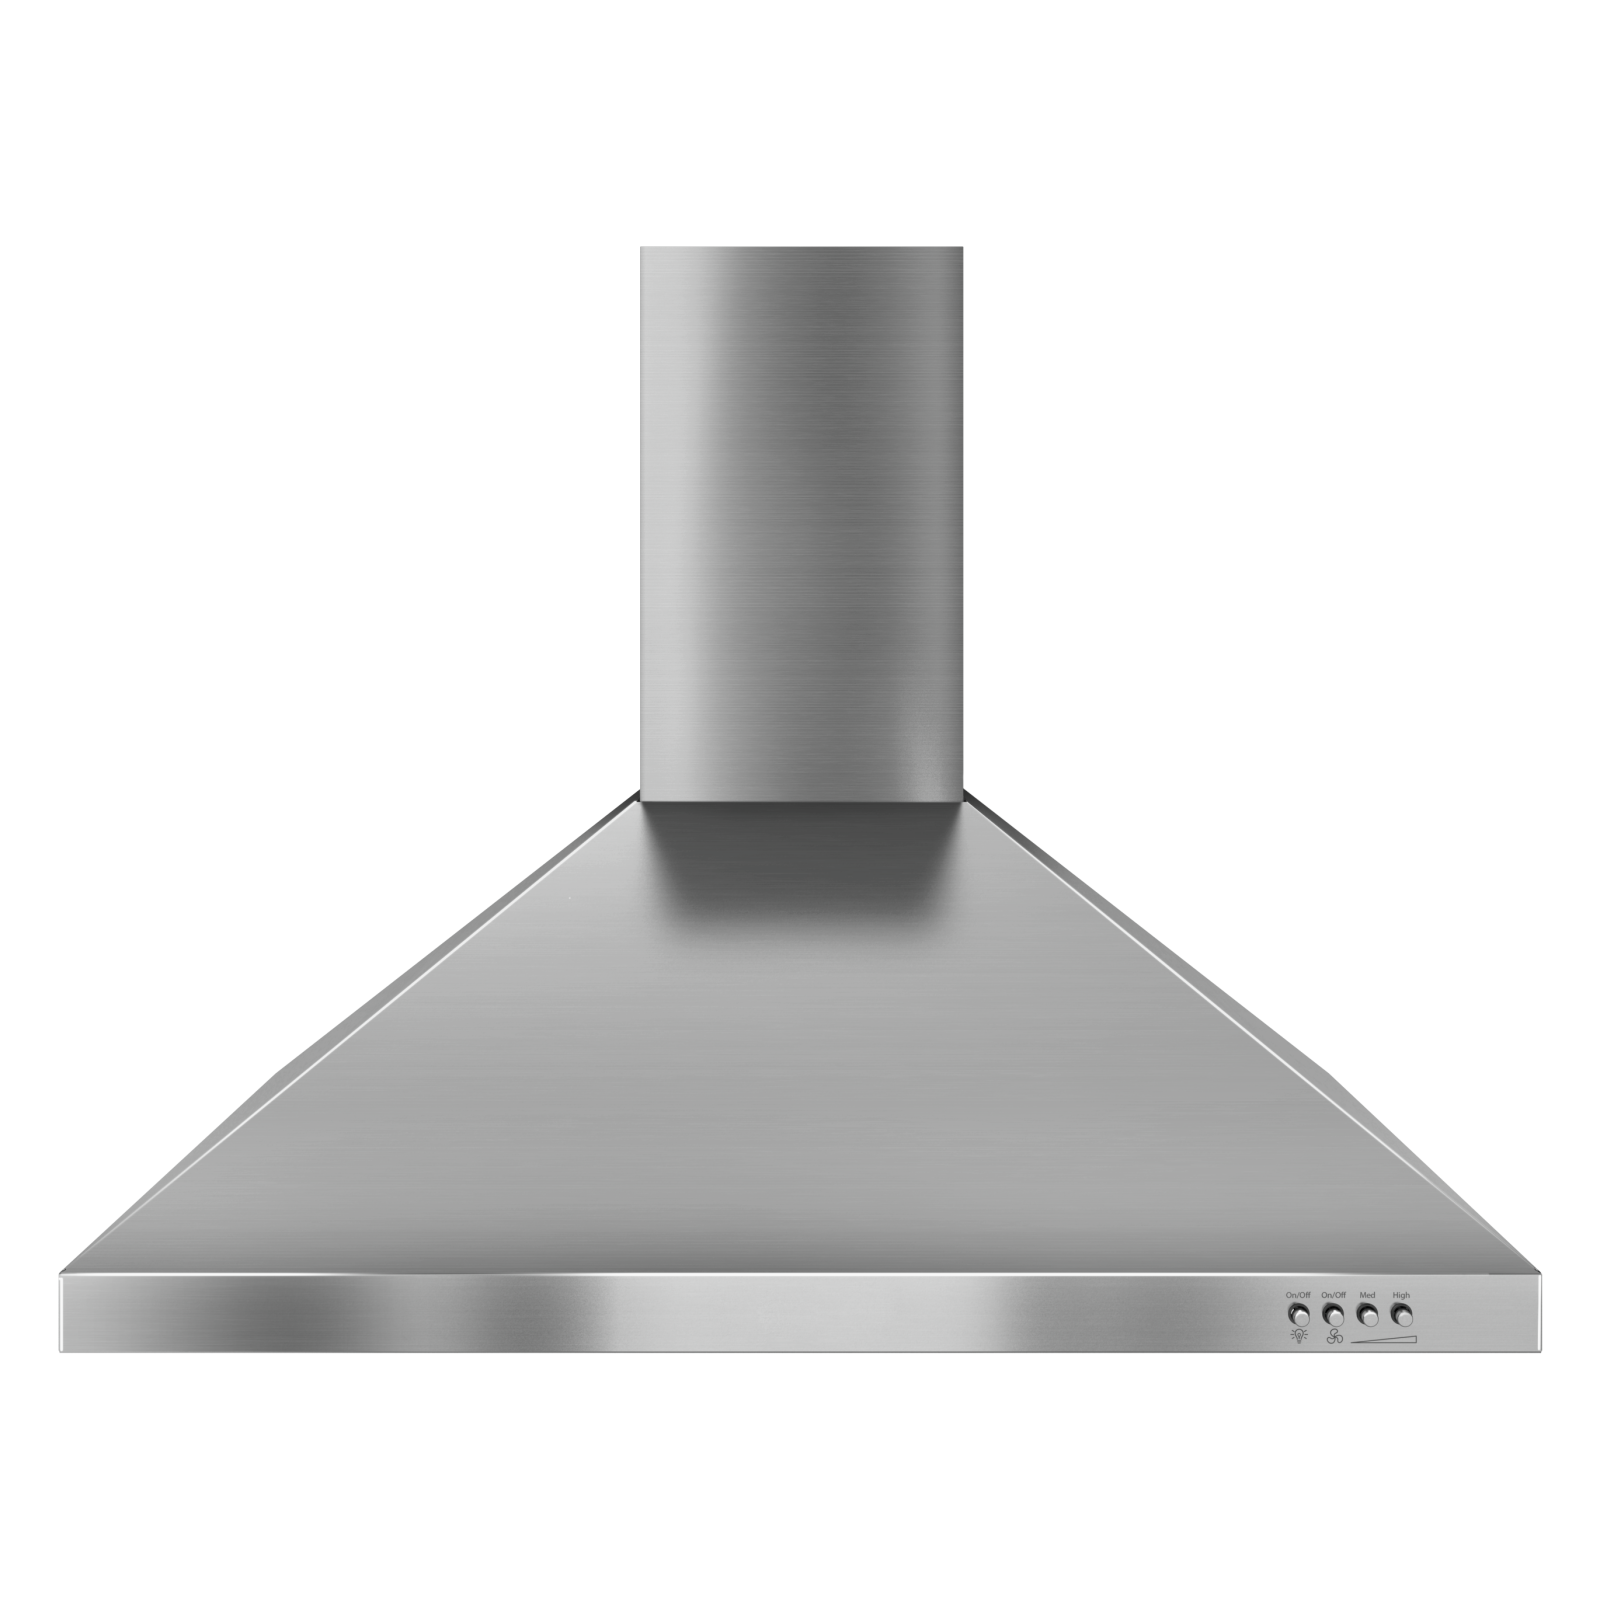 Whirlpool - 30 Inch 300 CFM Wall Mount and Chimney Range Vent in Stainless - GXW7330DXS